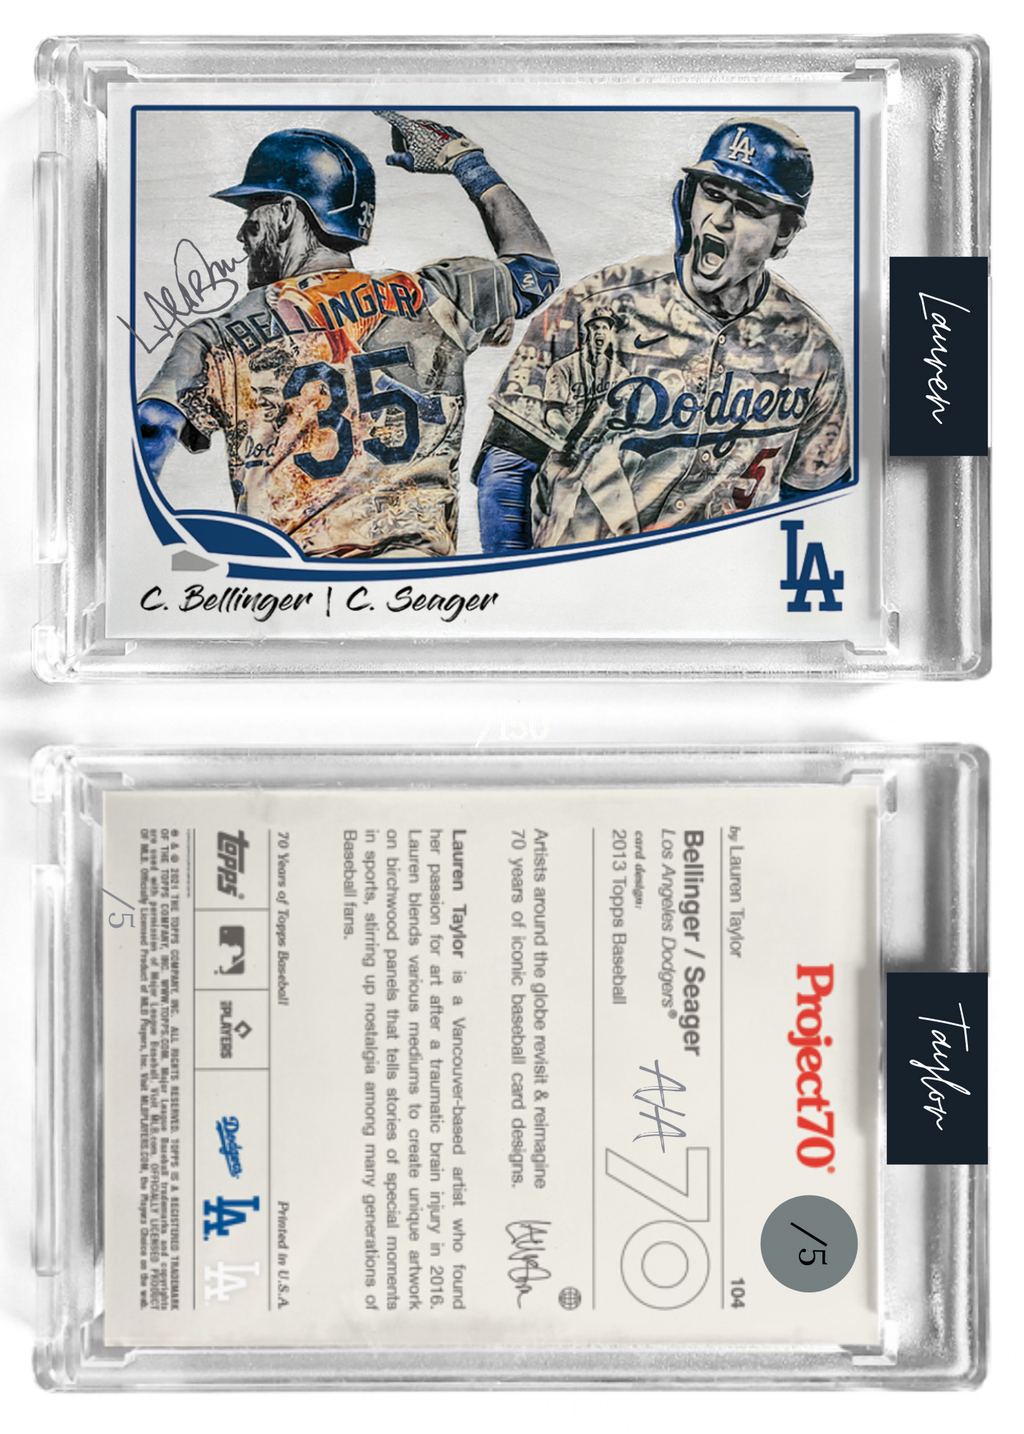 /5 Silver Metallic Artist Signature - Topps Project 70 130pt card #104 by Lauren Taylor - Cody Bellinger / Corey Seager